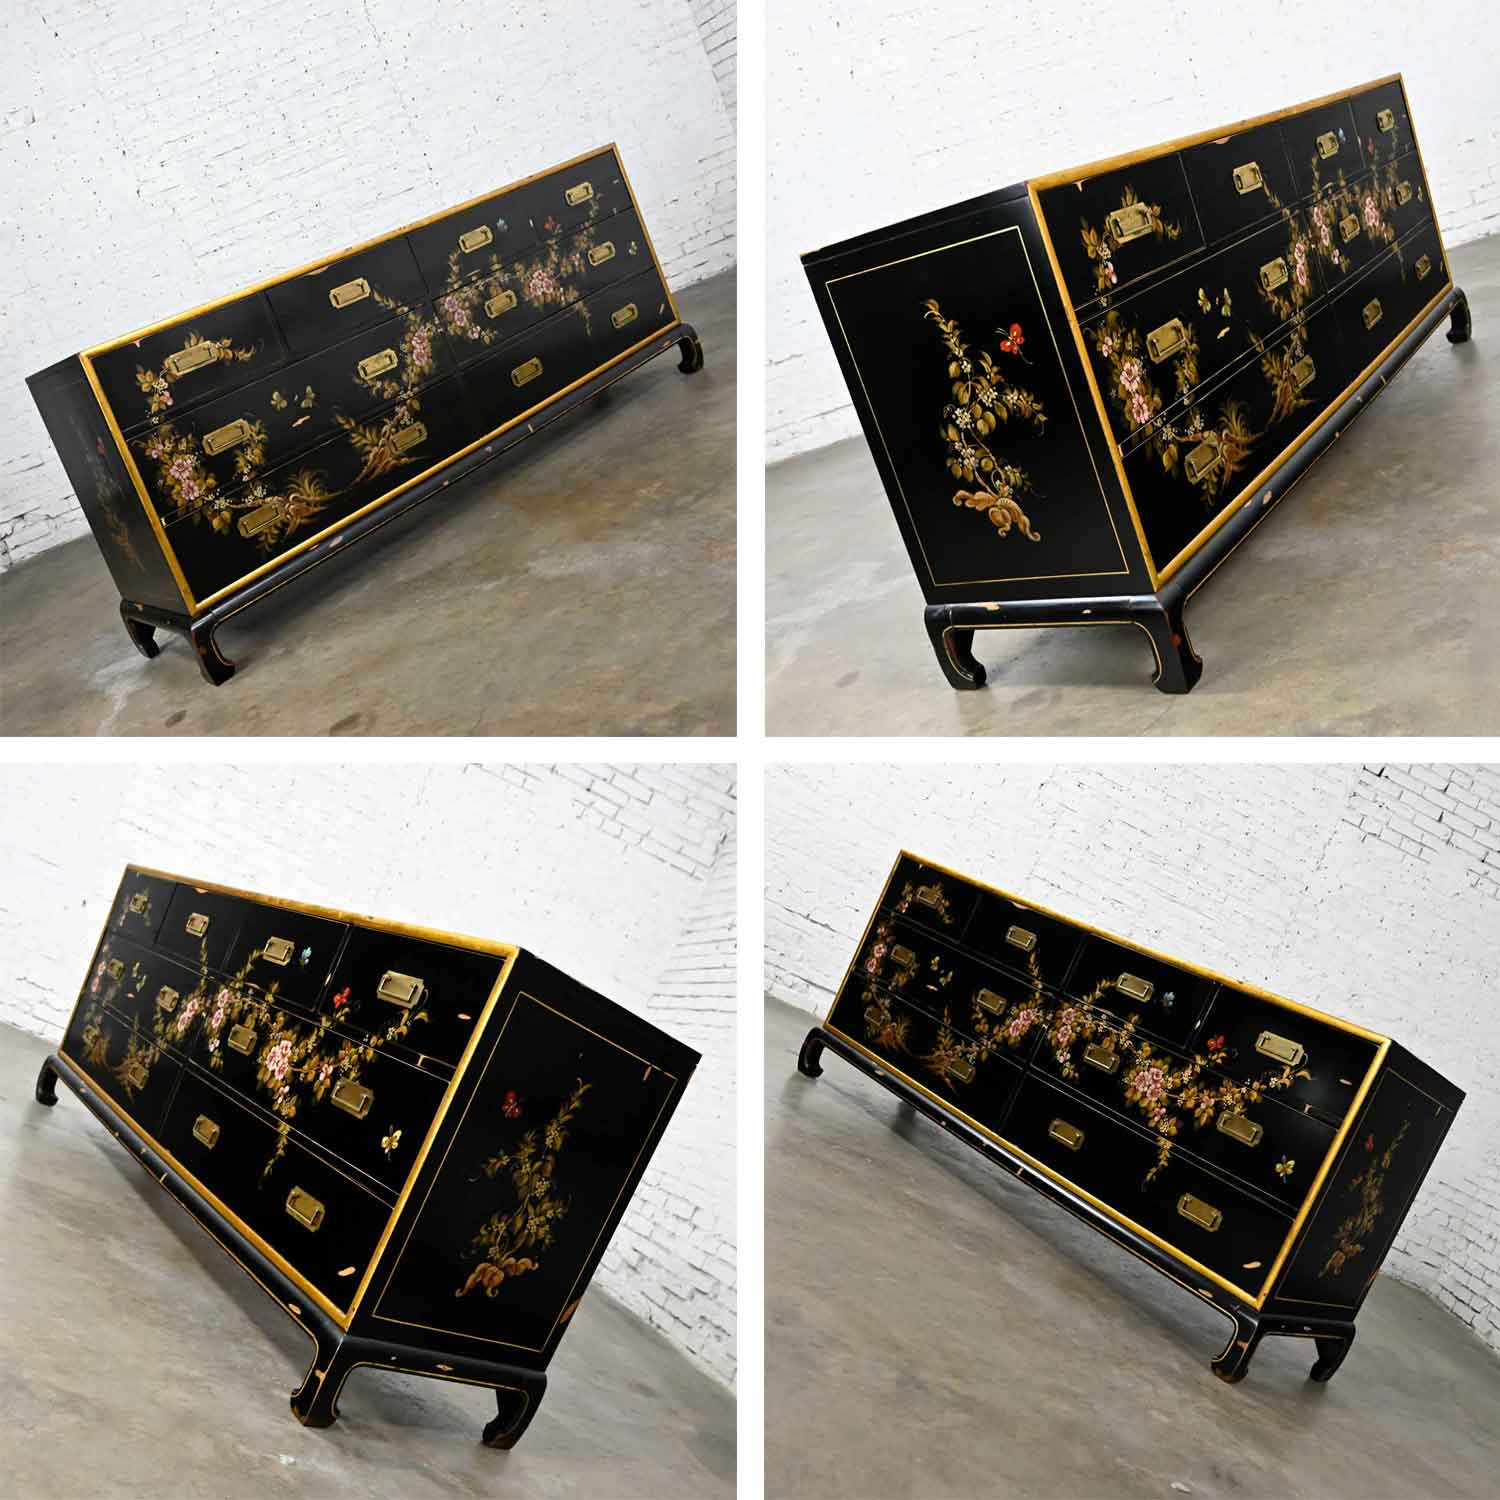 Vintage Union National Chinoiserie Chow Leg Ming Style Dresser Black with Floral Design & Distressed Finish